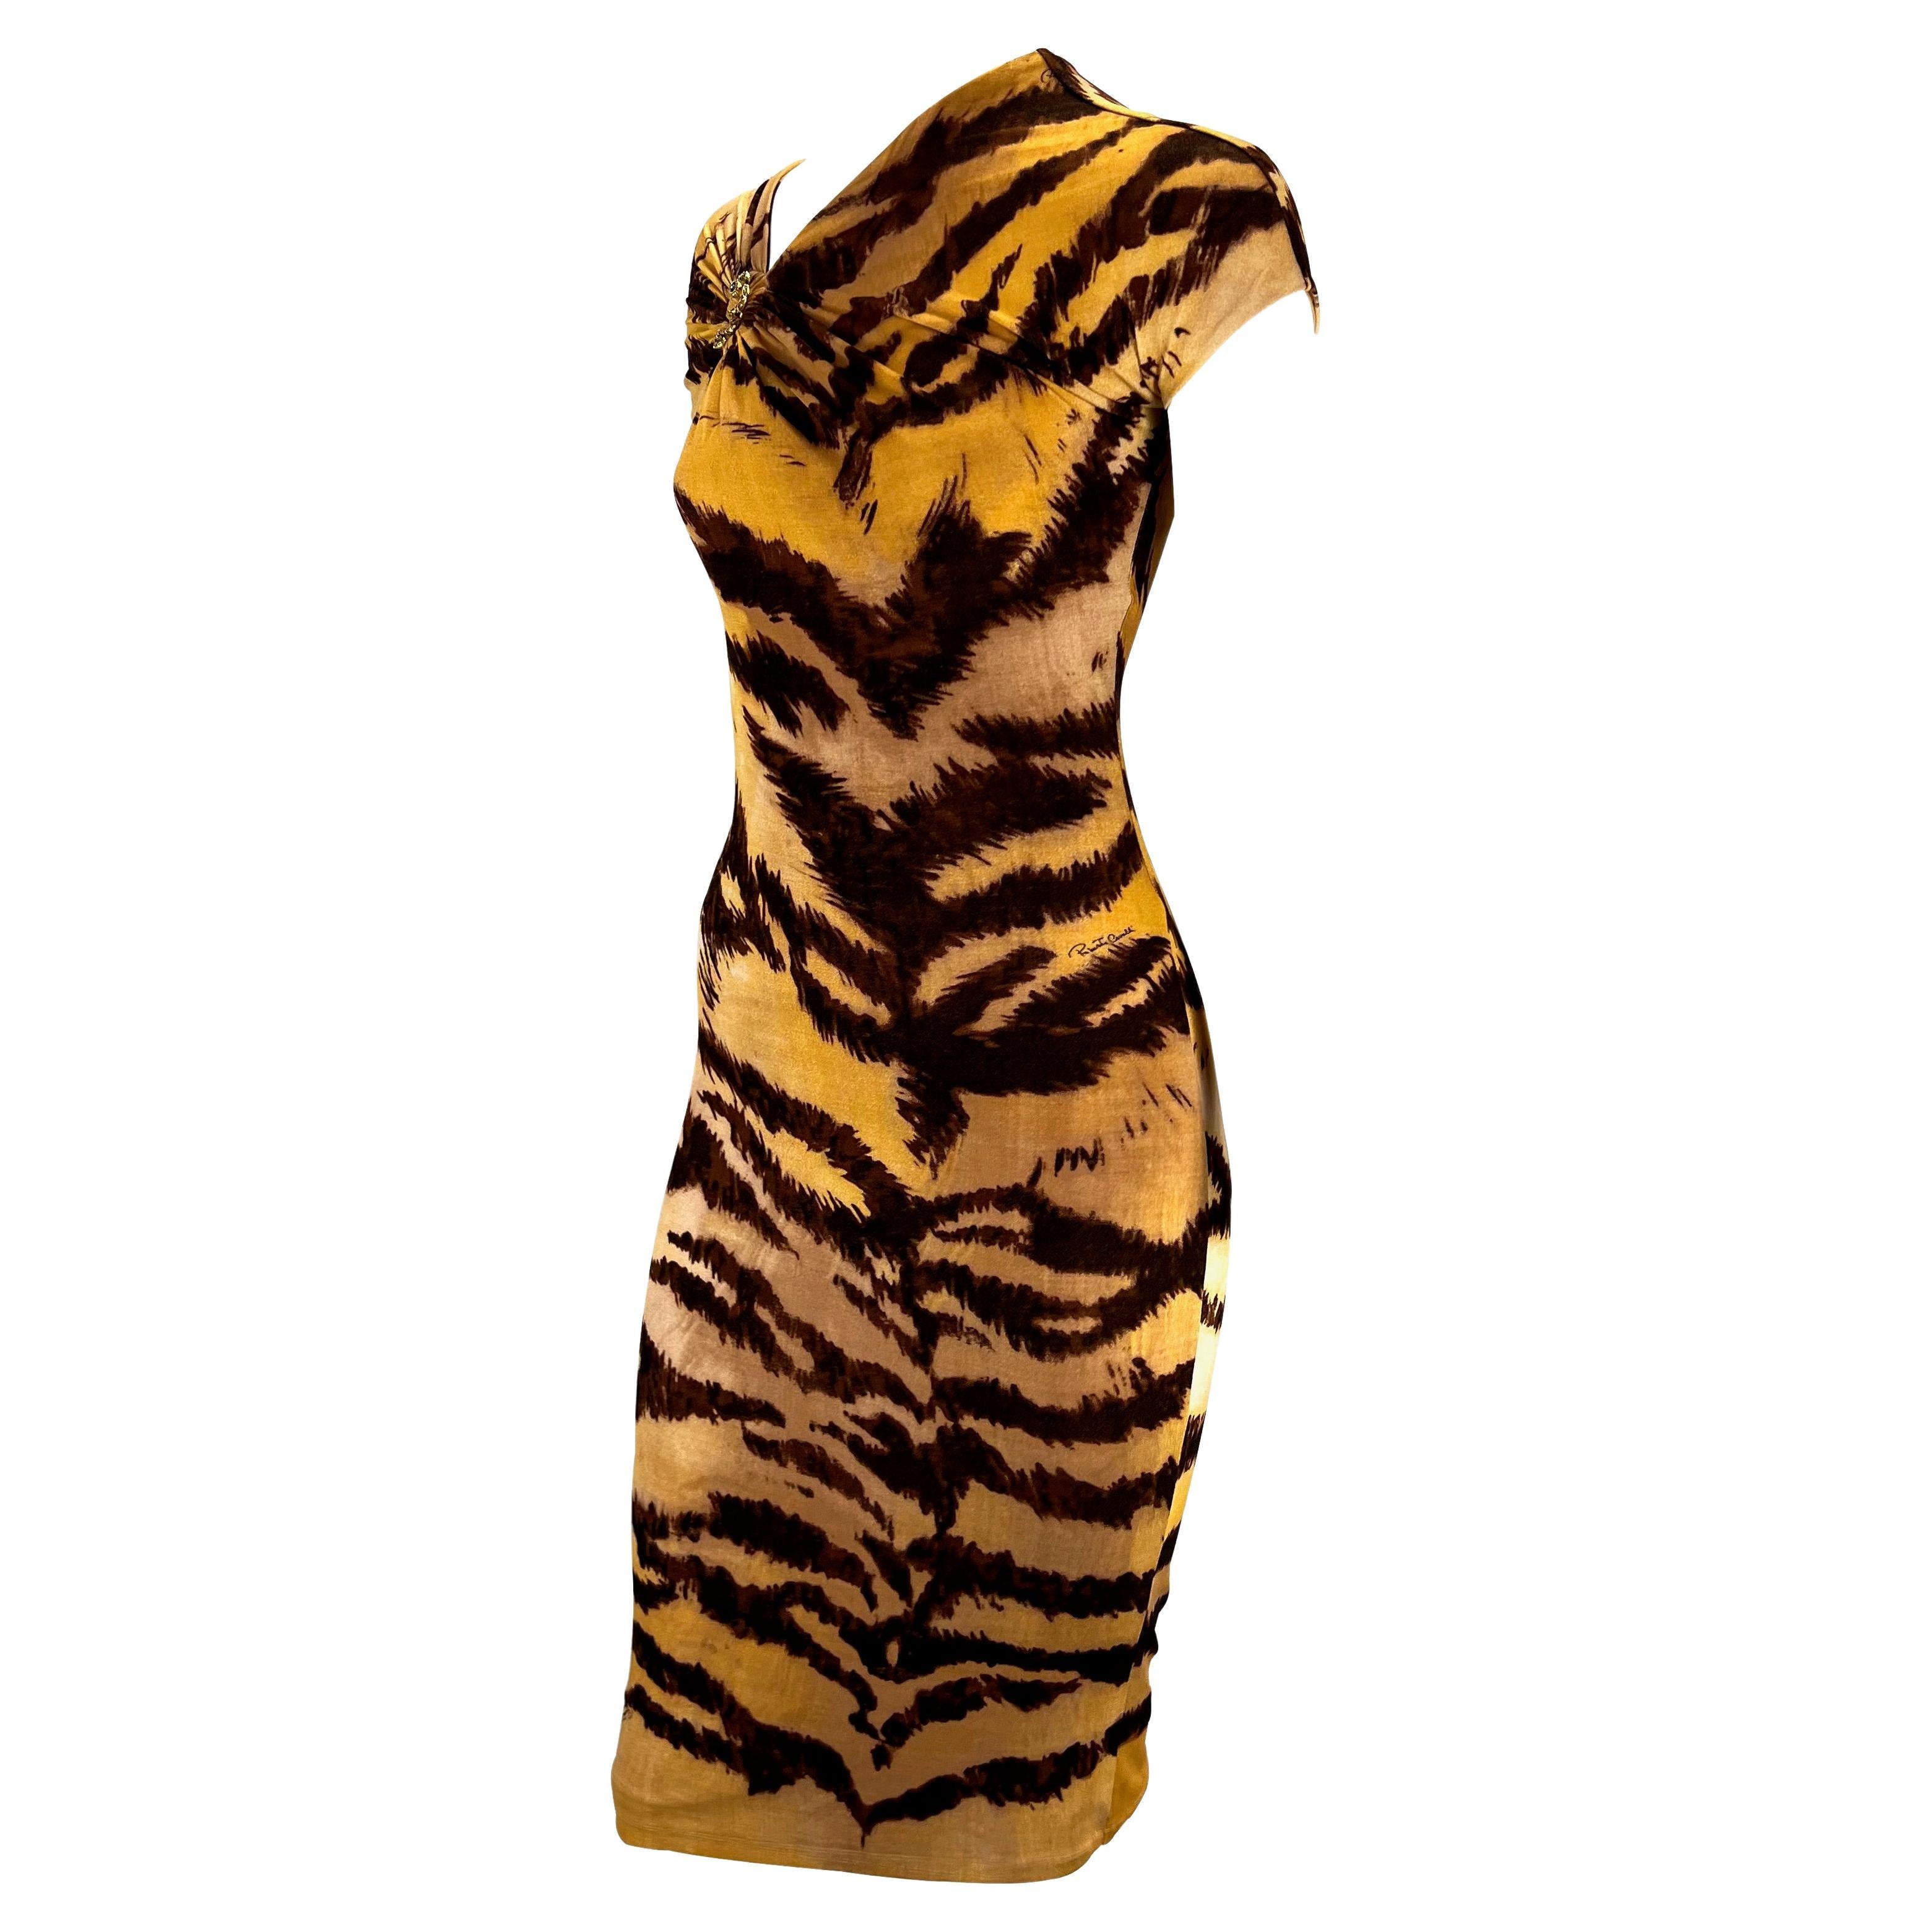 TheRealList presents: a form-fitting tiger print Roberto Cavalli dress. From 2007, this stretchy viscose dress boldly displays a larger tiger print. The dress features an asymetric neckline, petal sleeves, and a gold serpent brooch. Cavalli a master